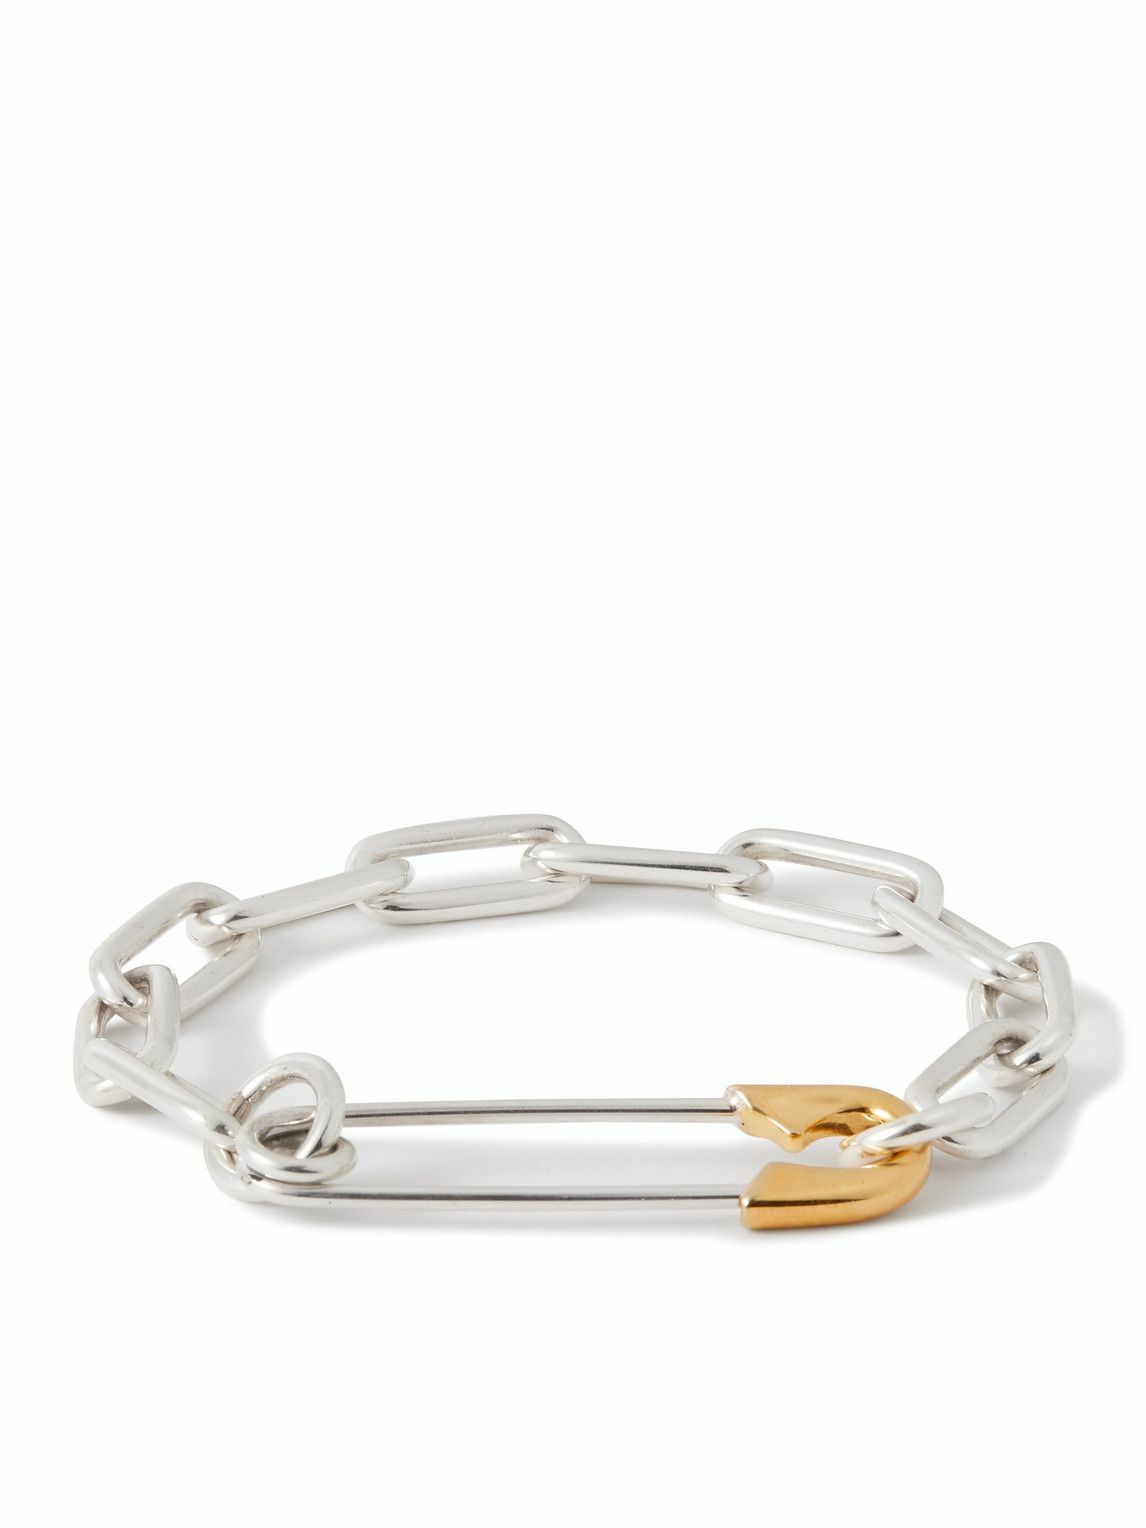 Photo: Jam Homemade - Safety Pin Silver, Gold-Plated and Diamond Bracelet